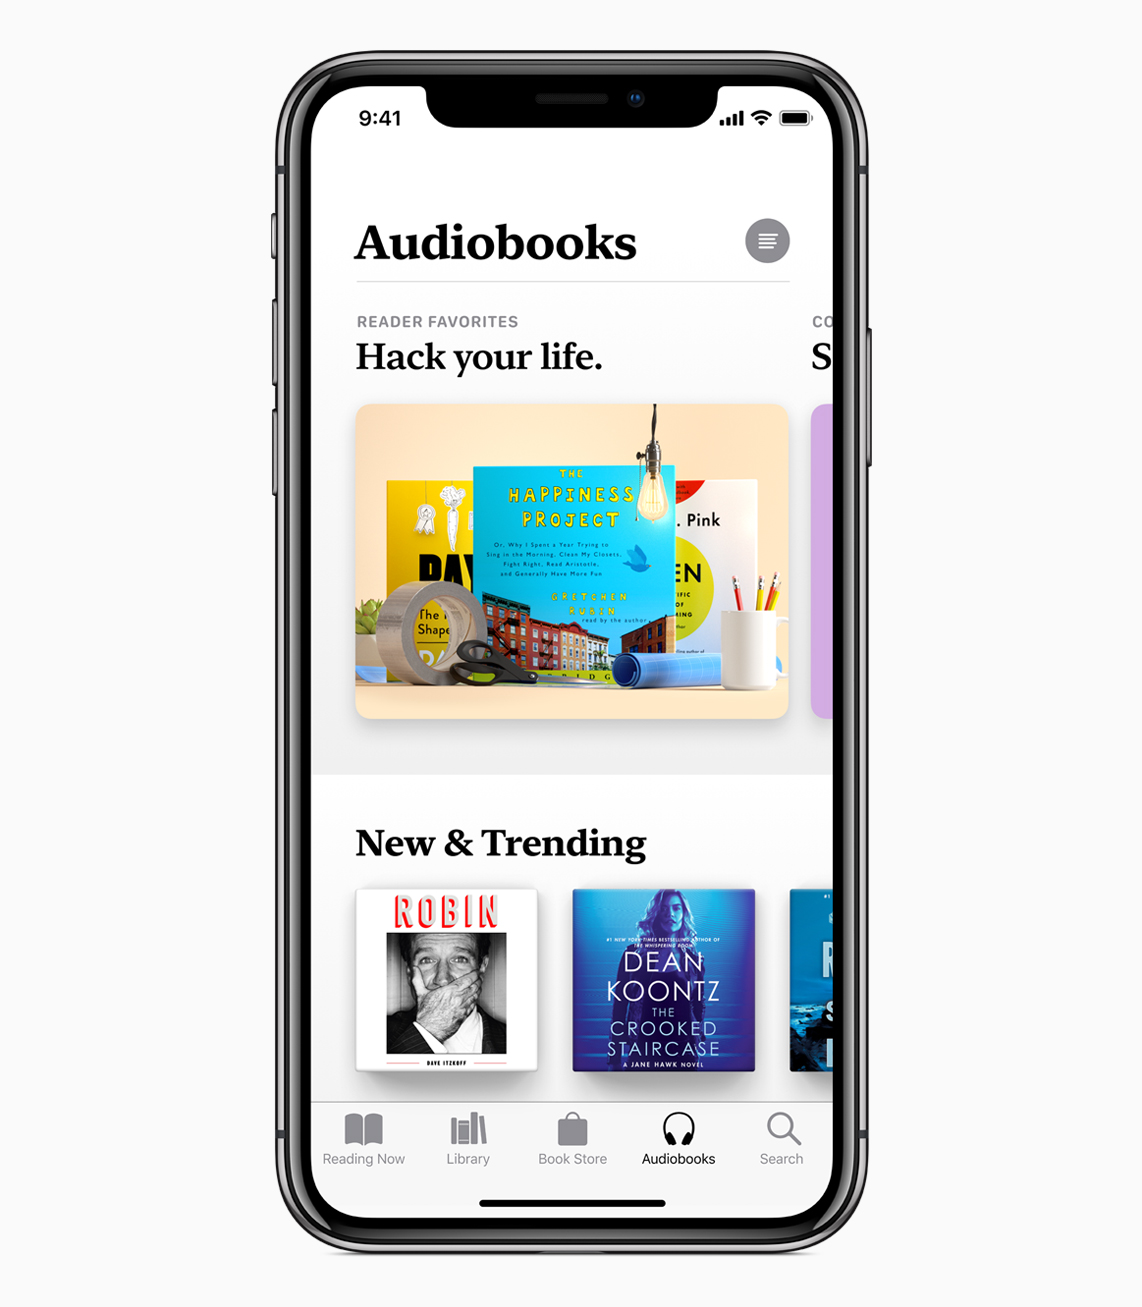 Apple Shares Preview of New Books App Coming in iOS 12 [Images]